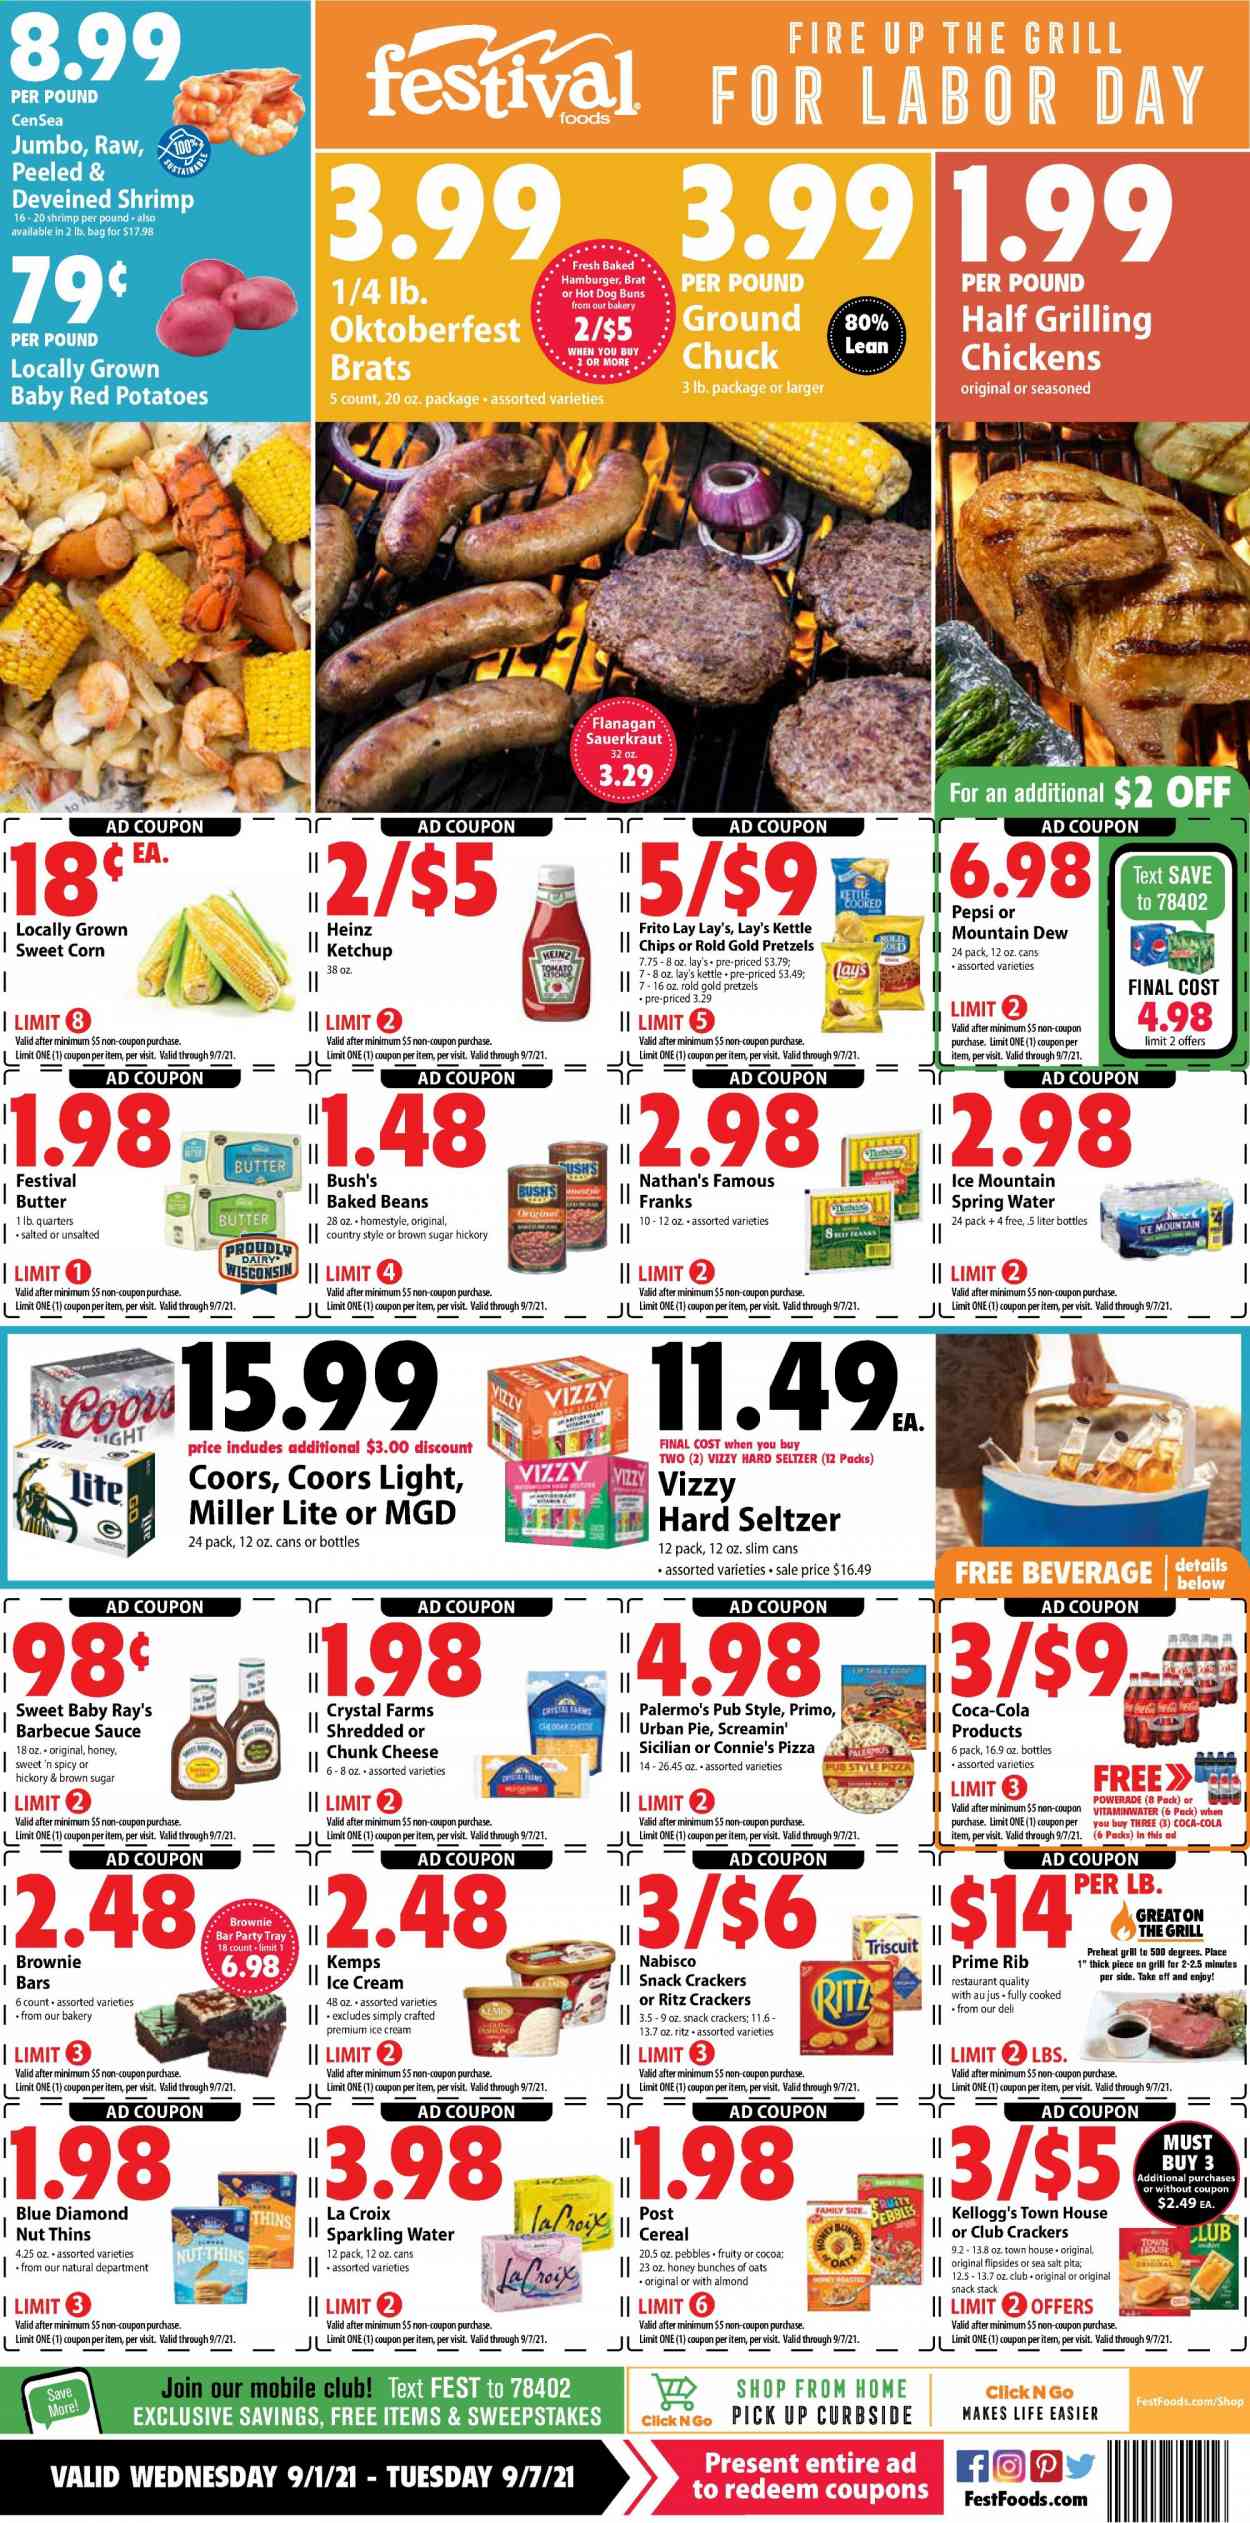 thumbnail - Festival Foods Flyer - 09/01/2021 - 09/07/2021 - Sales products - pita, pretzels, buns, brownies, beans, corn, potatoes, sweet corn, red potatoes, shrimps, pizza, hamburger, sauce, Urban Pie, chunk cheese, Kemps, butter, ice cream, Screamin' Sicilian, snack, crackers, Kellogg's, RITZ, chips, Lay’s, Thins, sauerkraut, Heinz, baked beans, cereals, Fruity Pebbles, BBQ sauce, ketchup, Blue Diamond, Coca-Cola, Mountain Dew, Powerade, Pepsi, spring water, sparkling water, Ice Mountain, Hard Seltzer, beer, ground chuck, Miller Lite, Coors. Page 1.